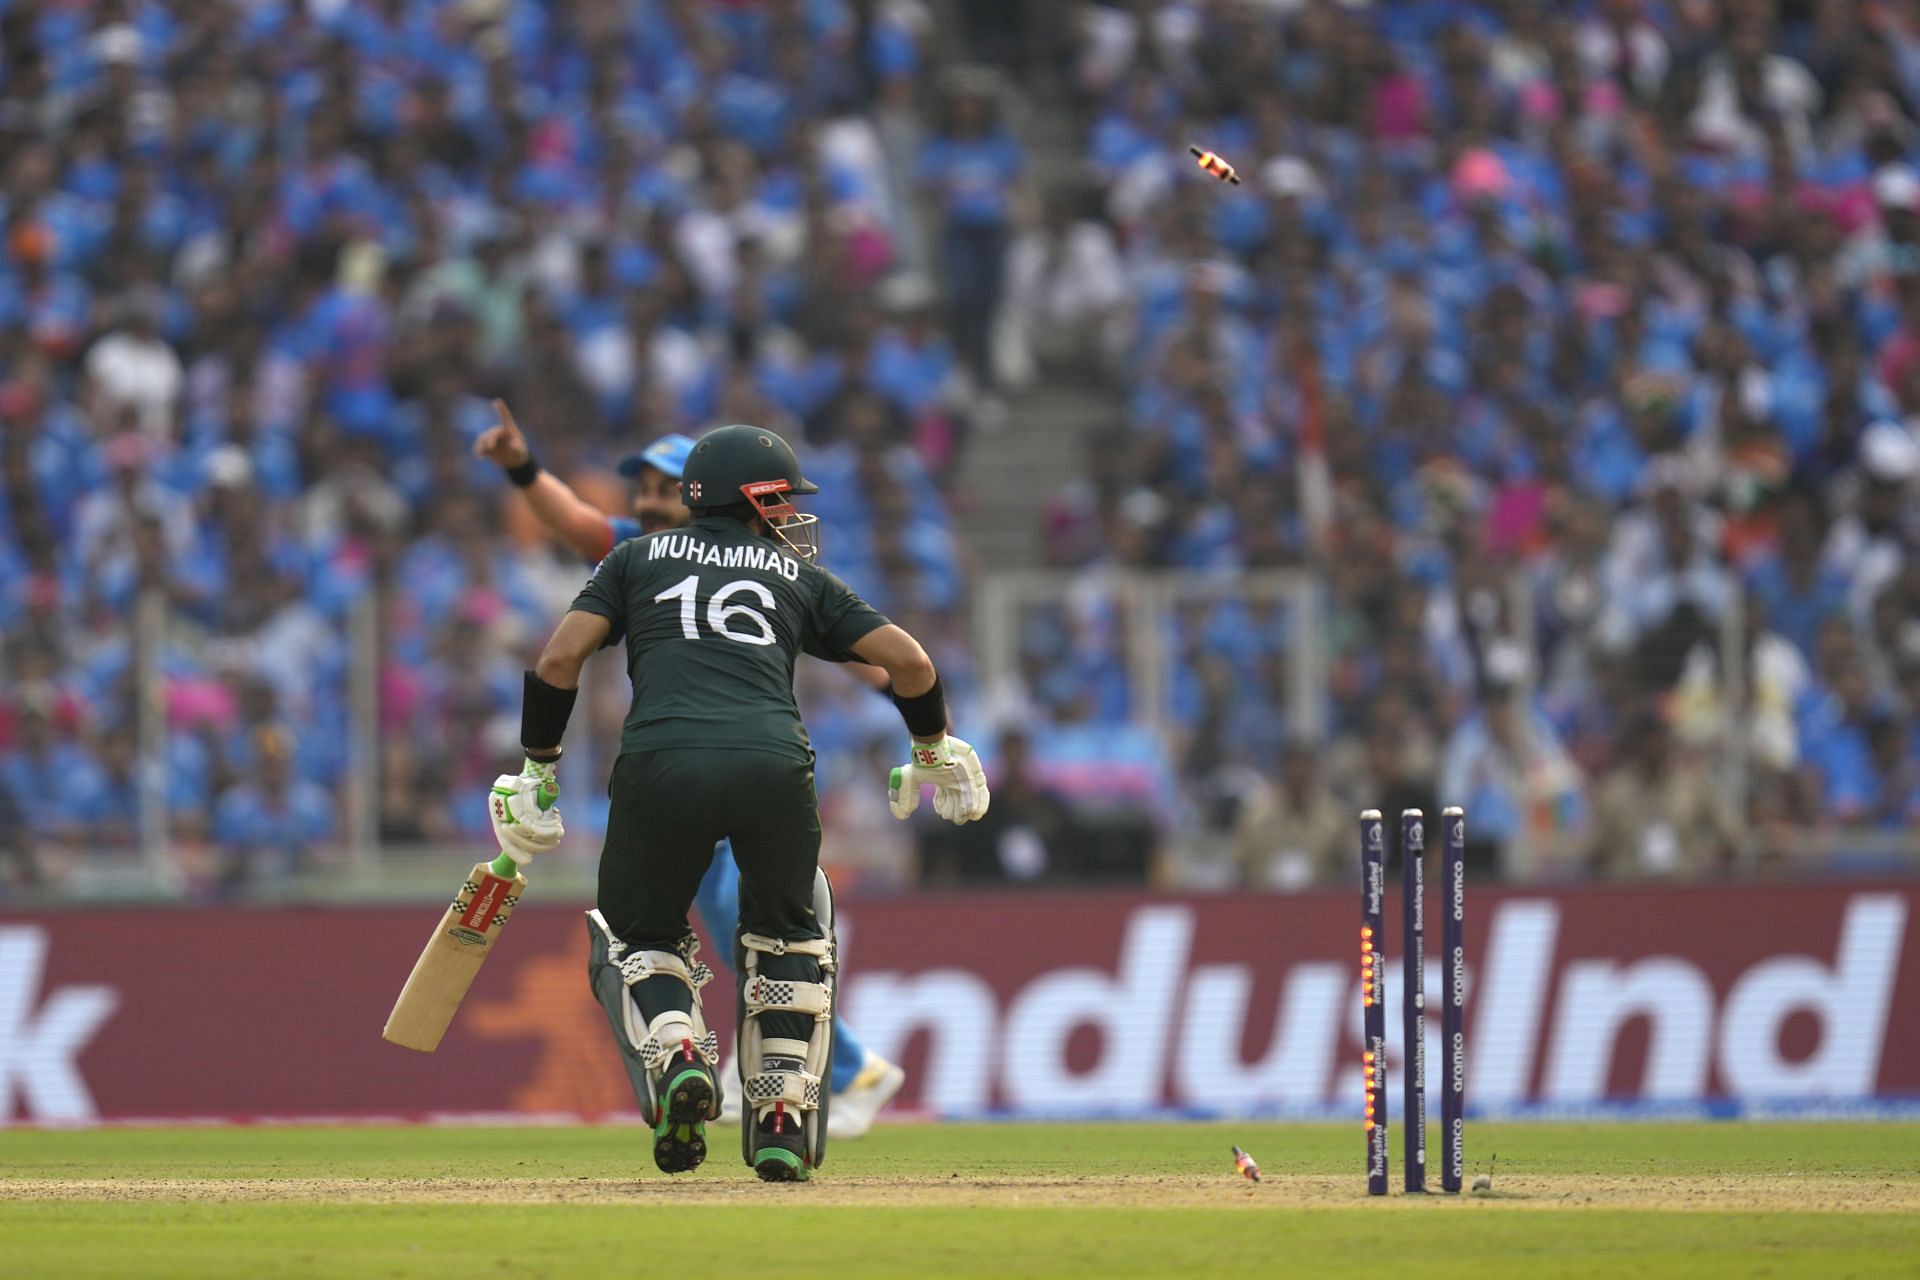 Mohammad Rizwan looks back after being bowled. (Pic: AP)